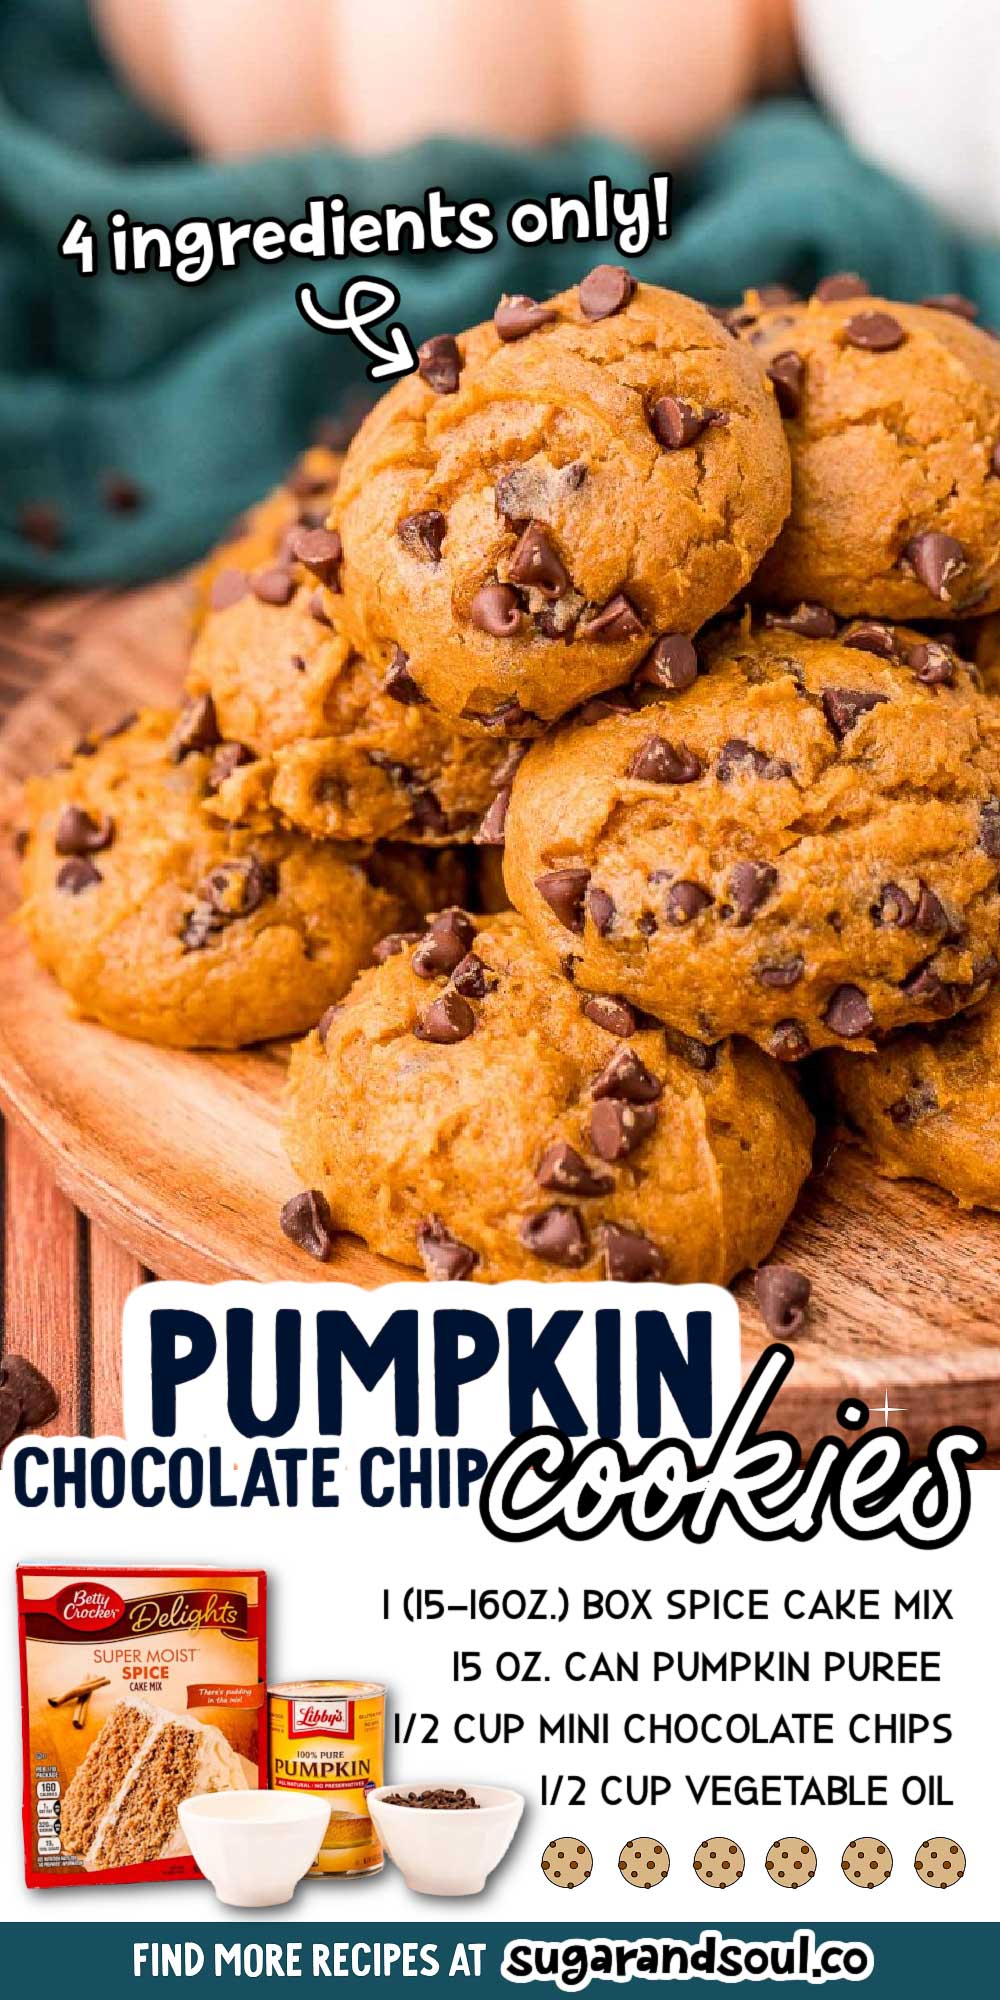 These 4-Ingredient Pumpkin Chocolate Chip Cookies are the BEST! You'll love how moist and fluffy they are and so easy to make too! The first batch is ready in just 20 minutes! via @sugarandsoulco